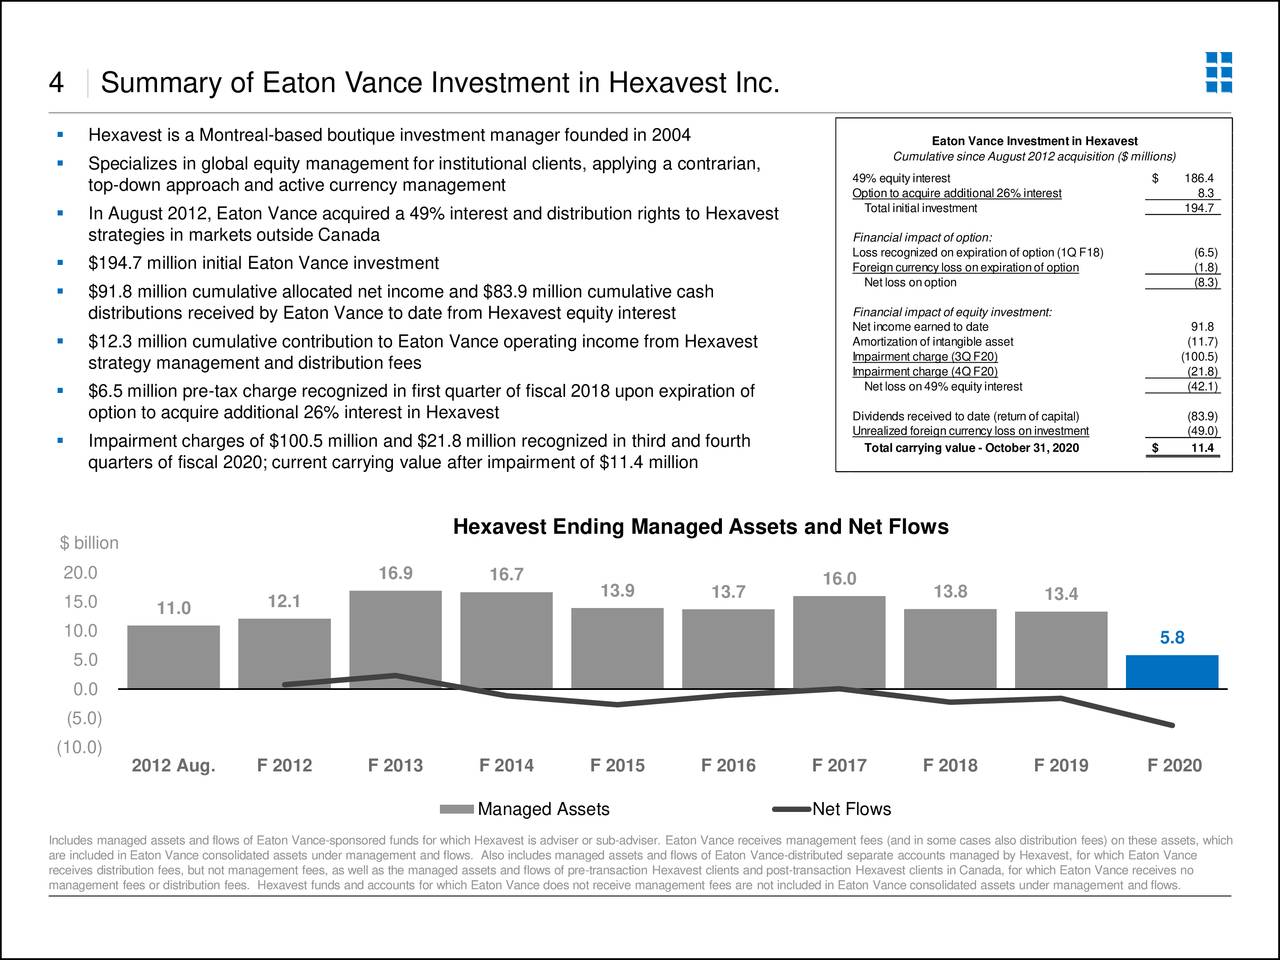 Eaton Vance Corp. 2020 Q4 Results Earnings Call Presentation (NYSE